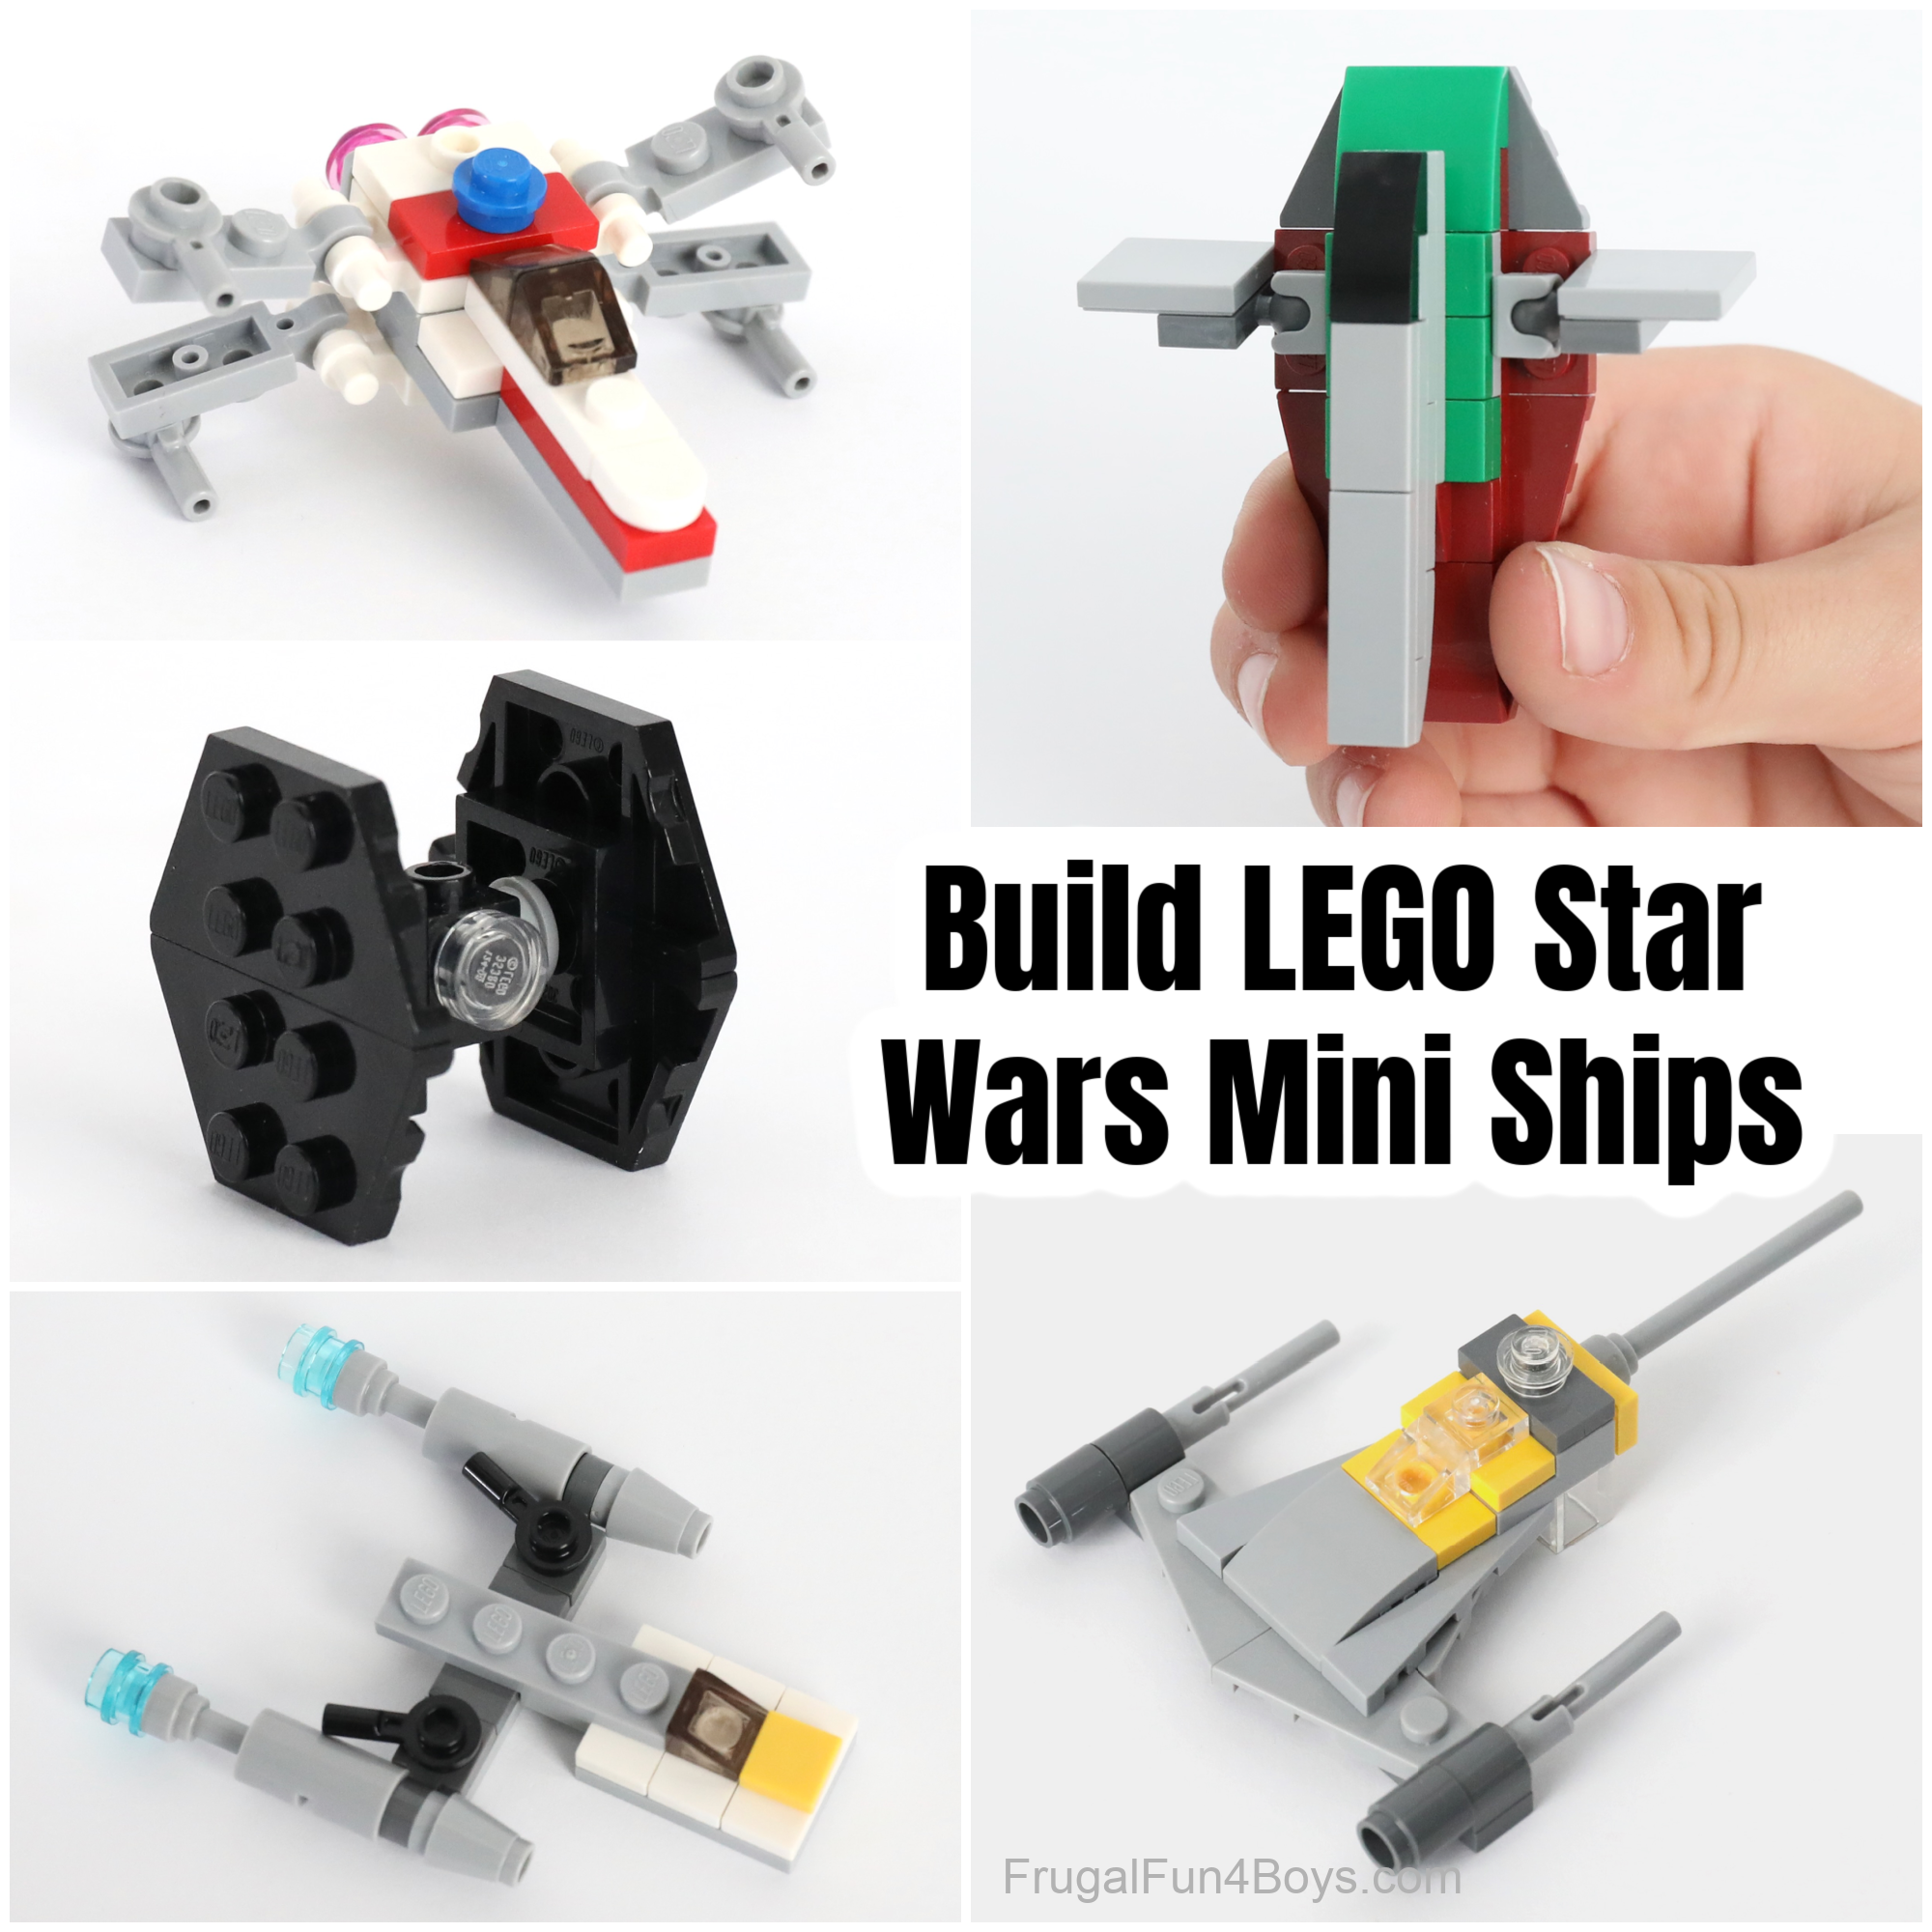 Build Your Own LEGO Mini Star Wars Ships - Frugal Fun For Boys and Girls